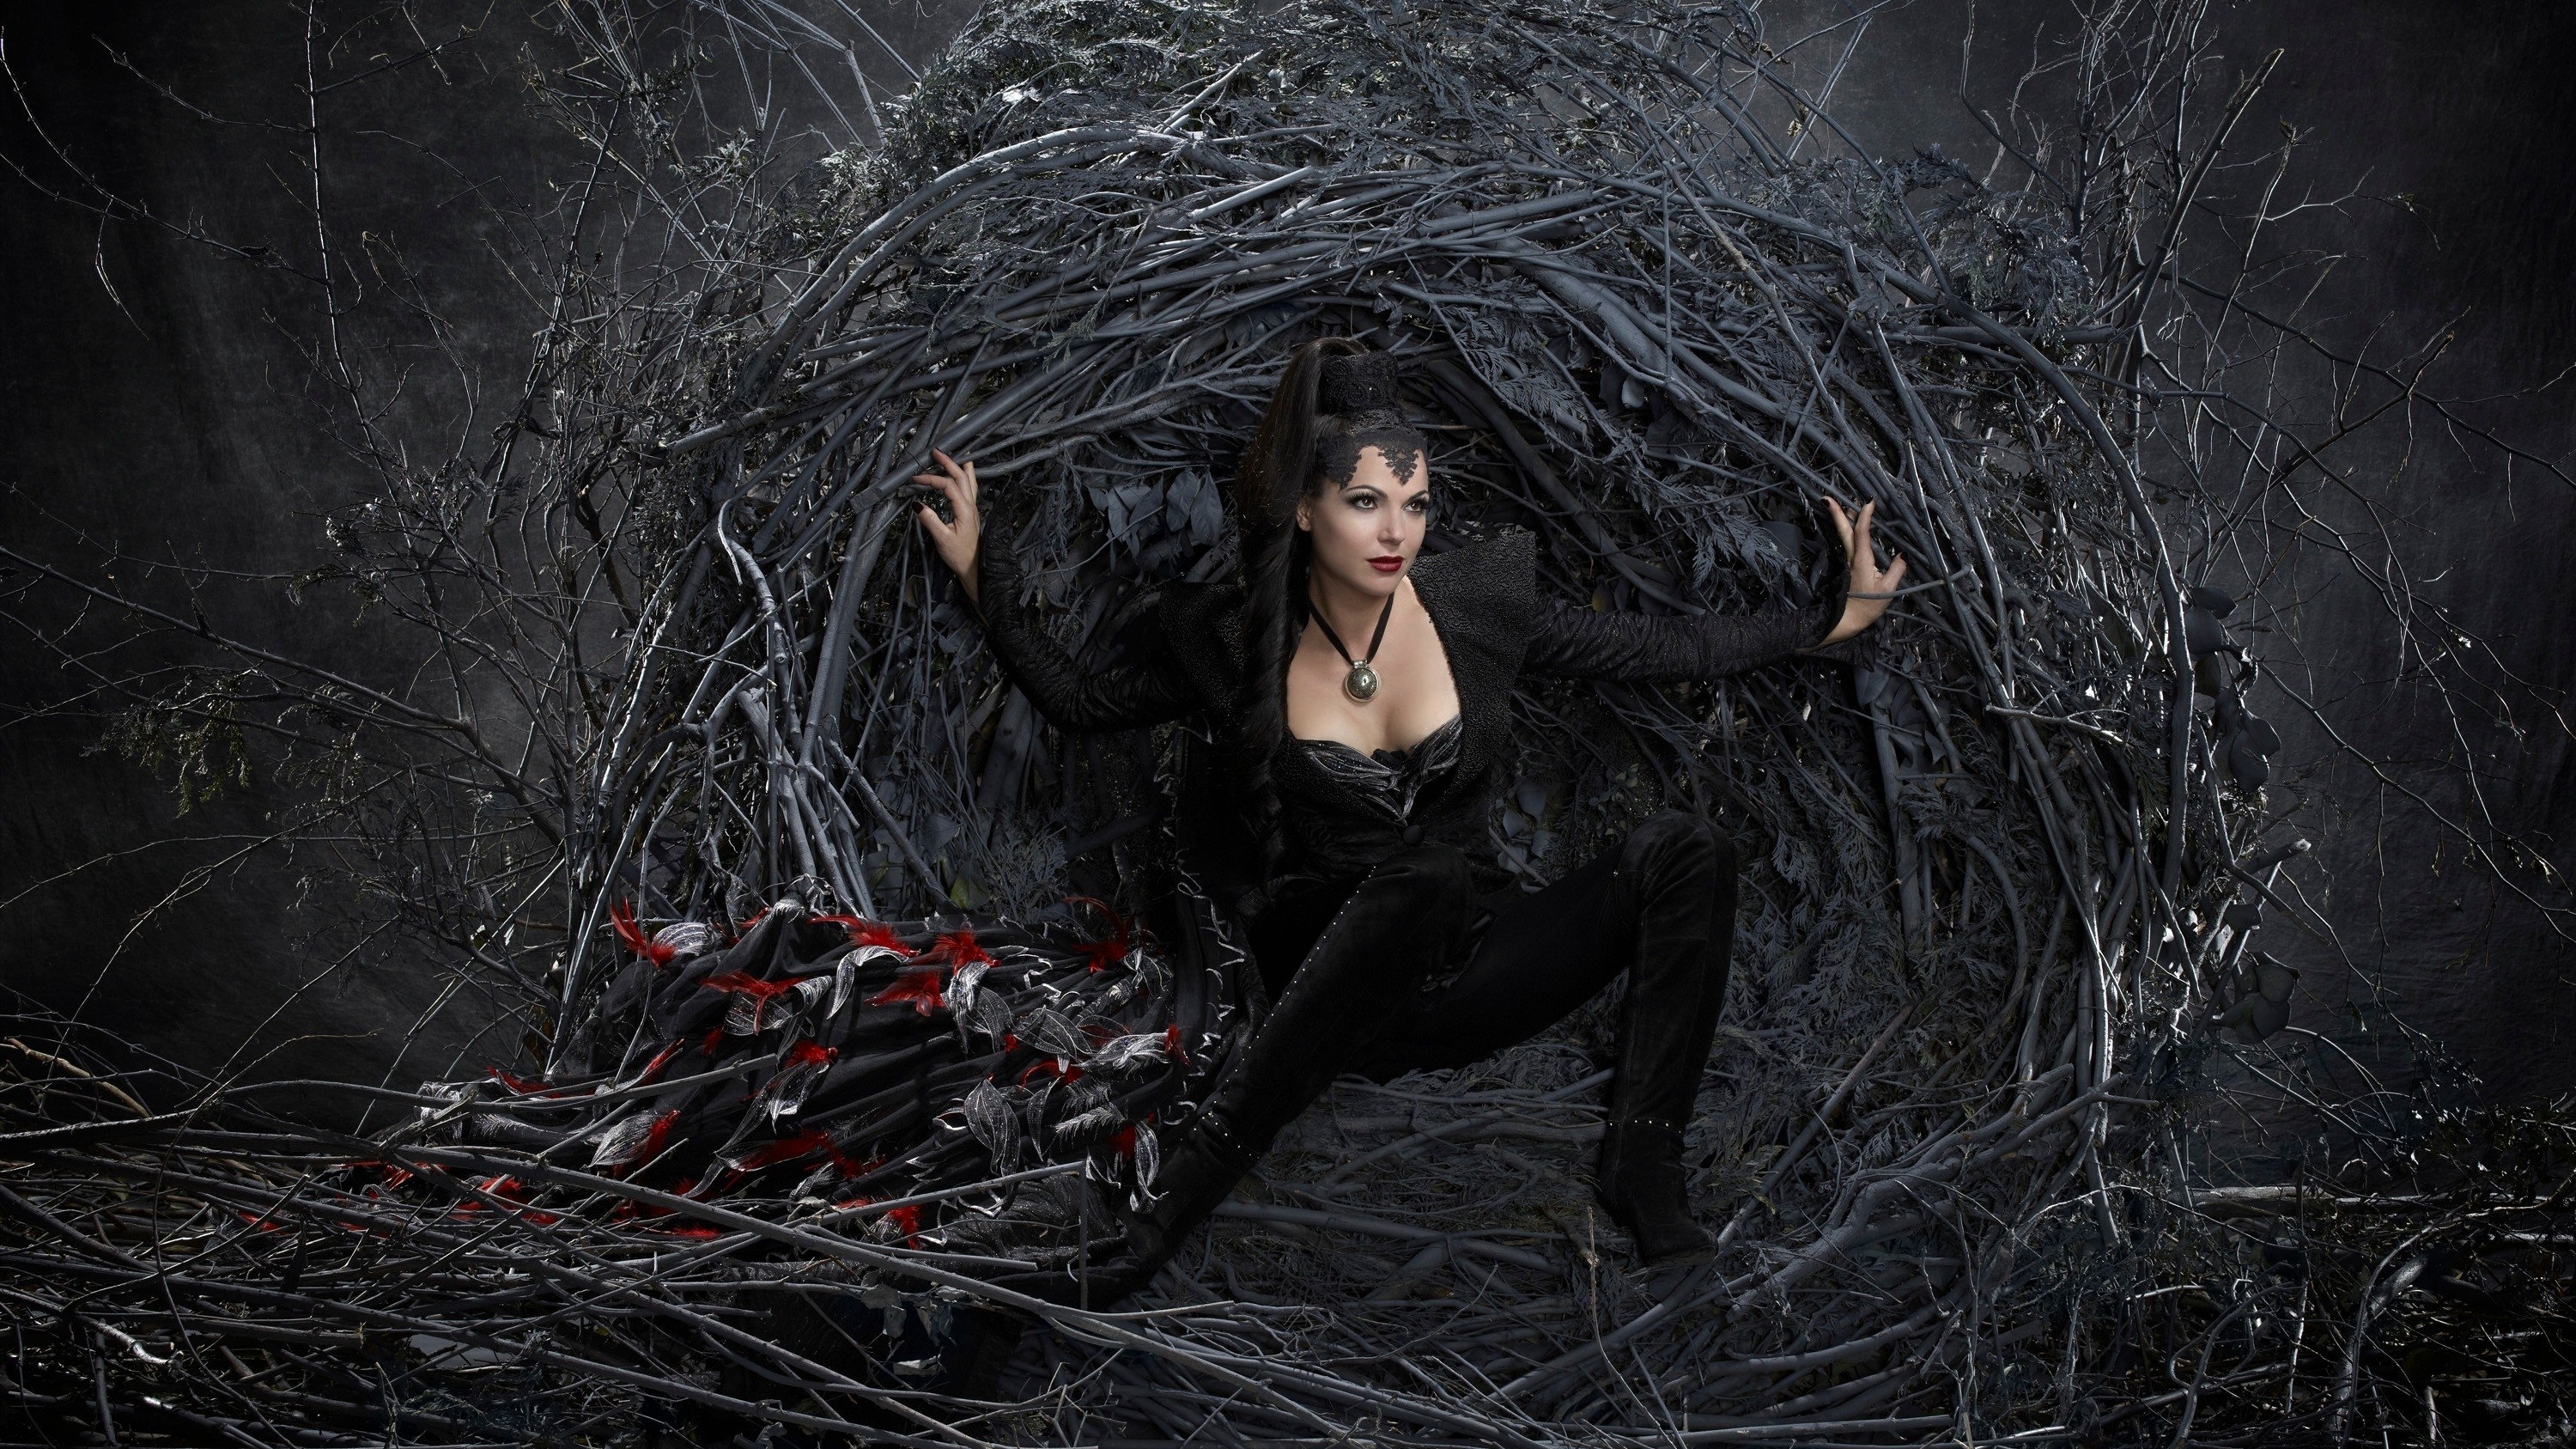 lana parrilla, regina mills, tv show, once upon a time, evil queen (once upon a time)